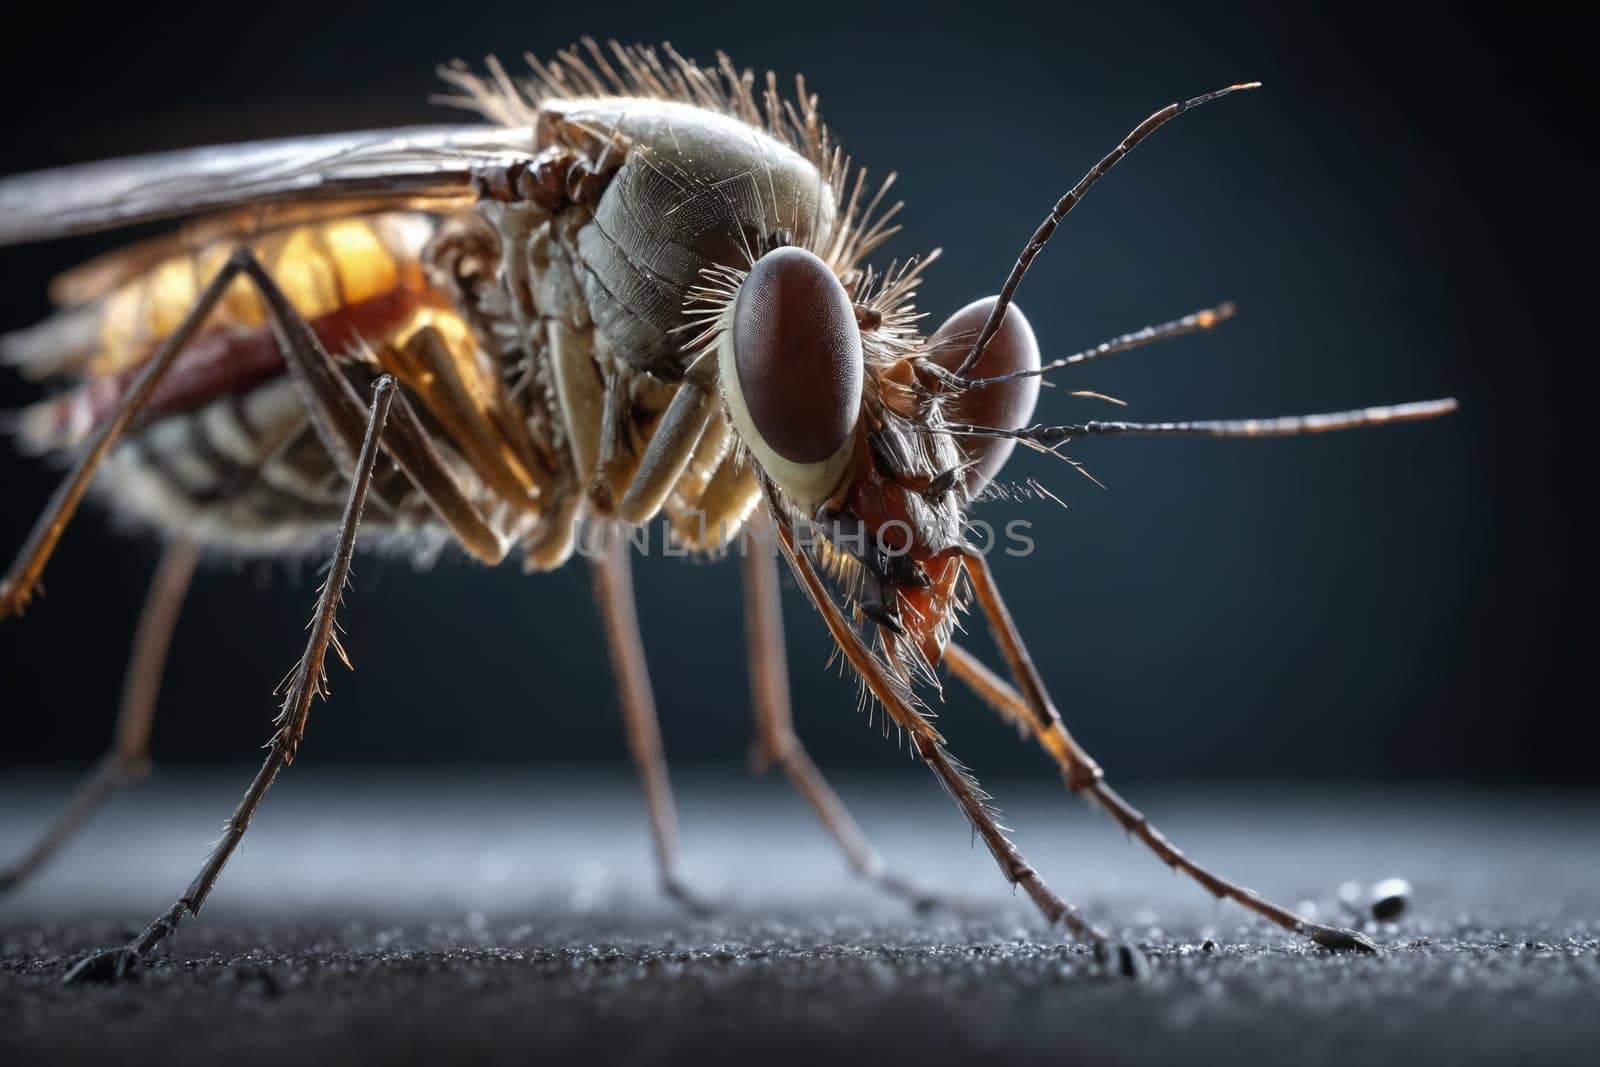 Stunning close-up of a mosquito, showcasing its detailed eyes and textured wings with a soft-focus background.